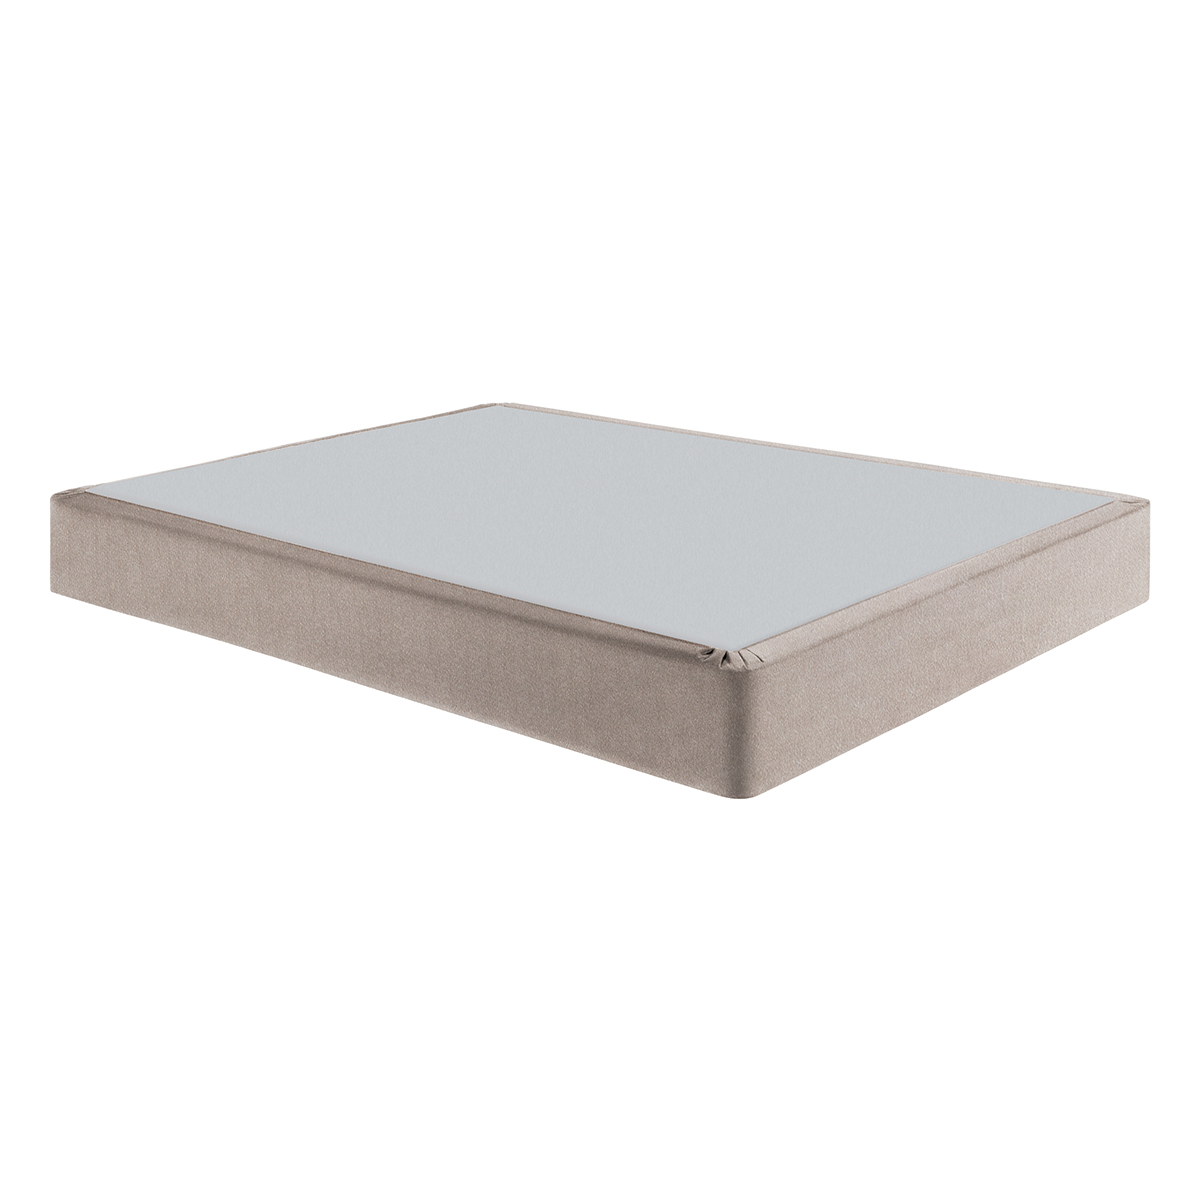 Nature's Choice High Profile 9in. Boxspring